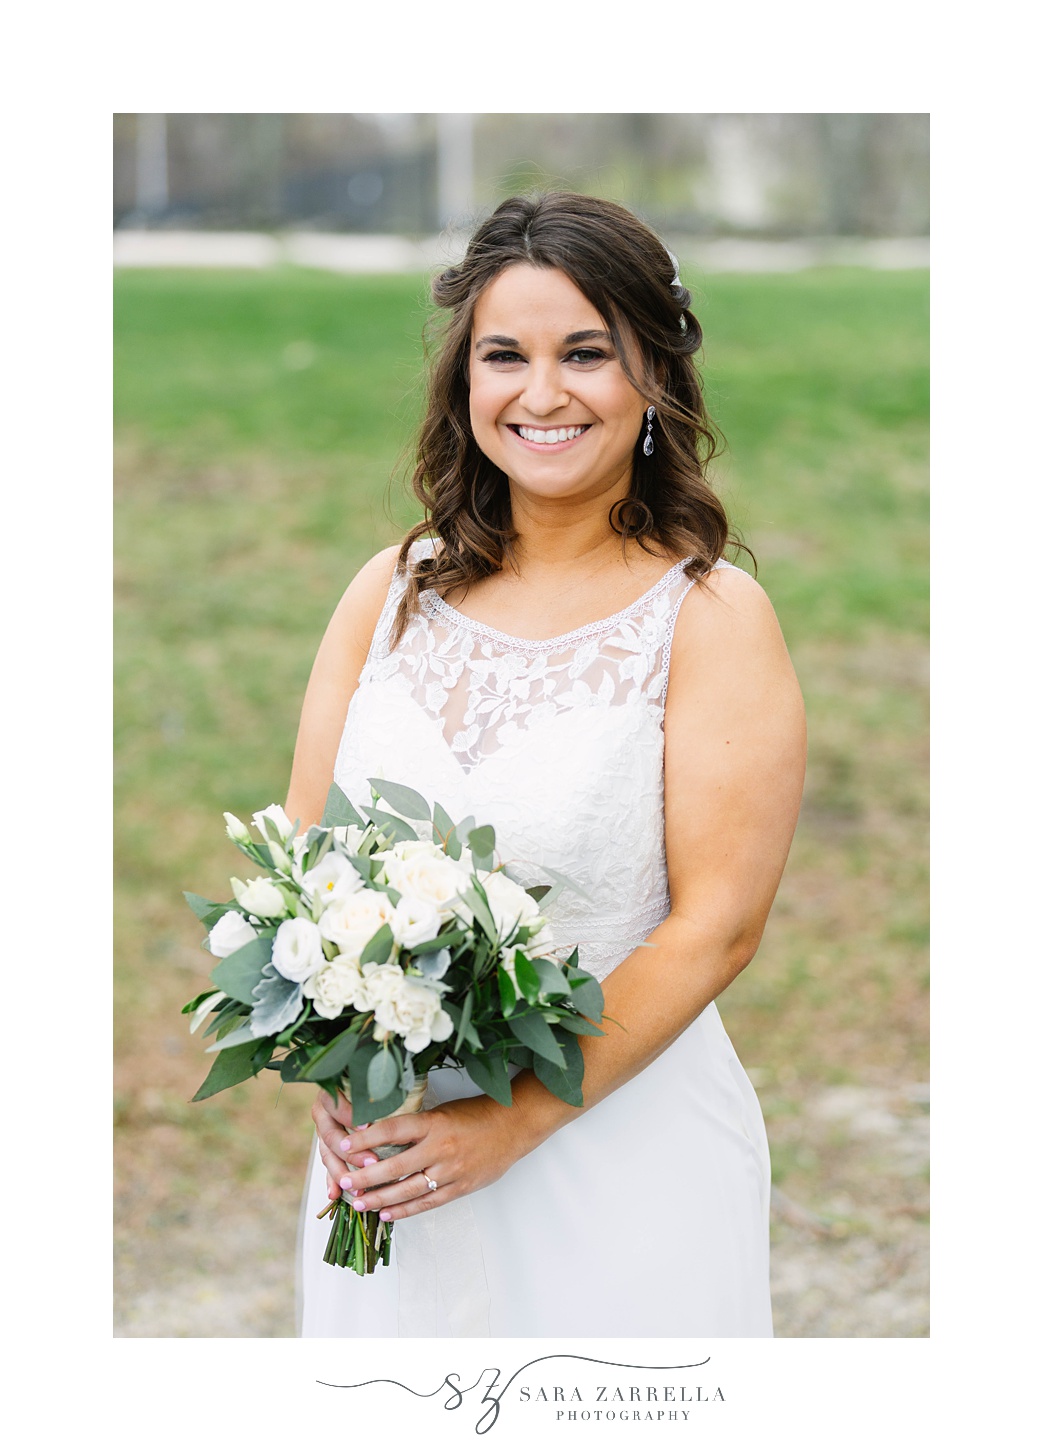 classic bridal portrait at Kirkbrae Country Club